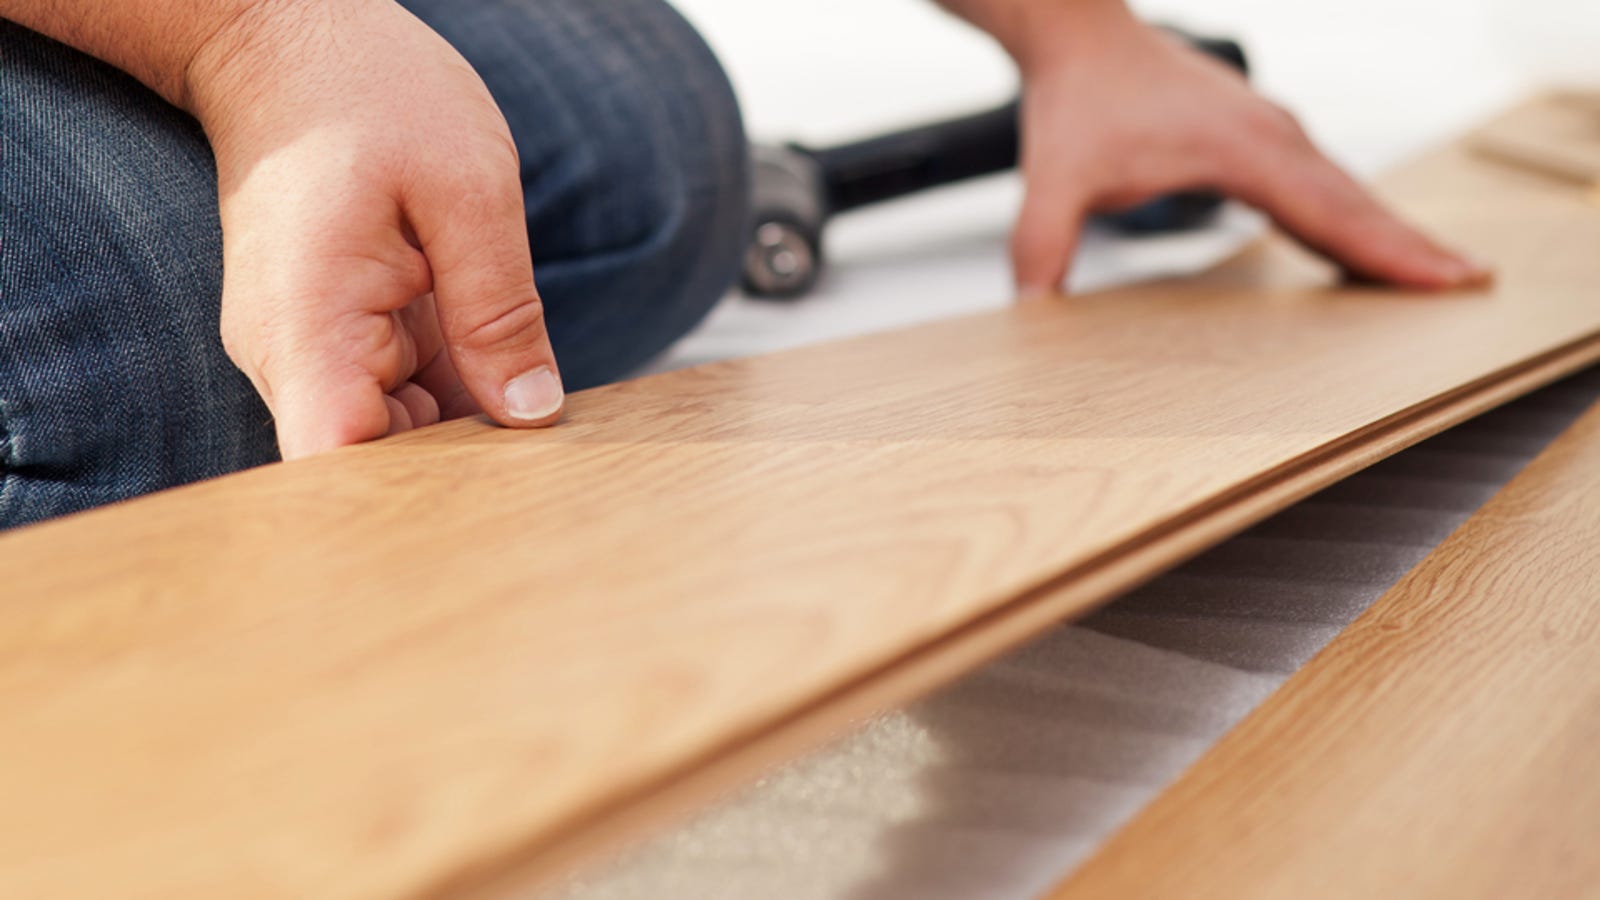 How to Install Wood Flooring for Cheap